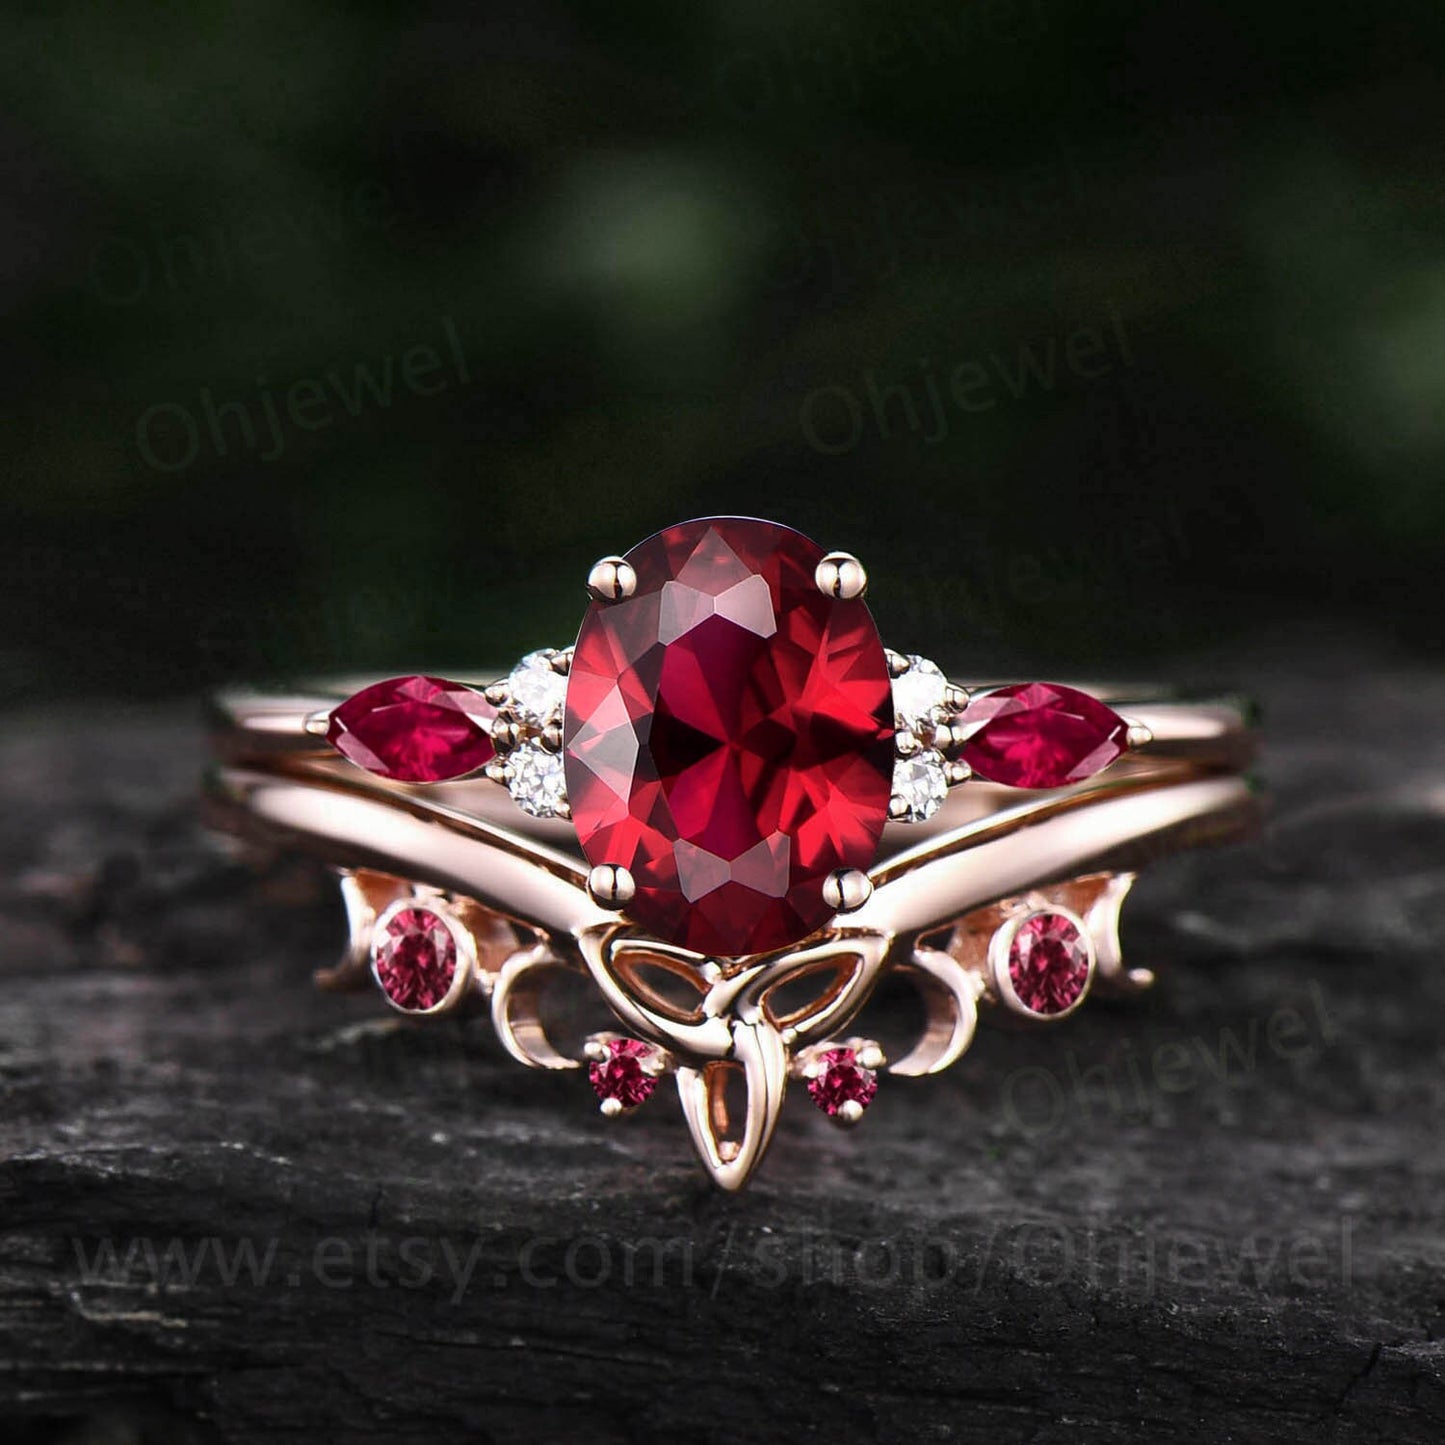 Oval cut red ruby ring vintage unique engagement ring set rose gold cluster marquise cut ruby jewelry anniversary wedding ring women gift